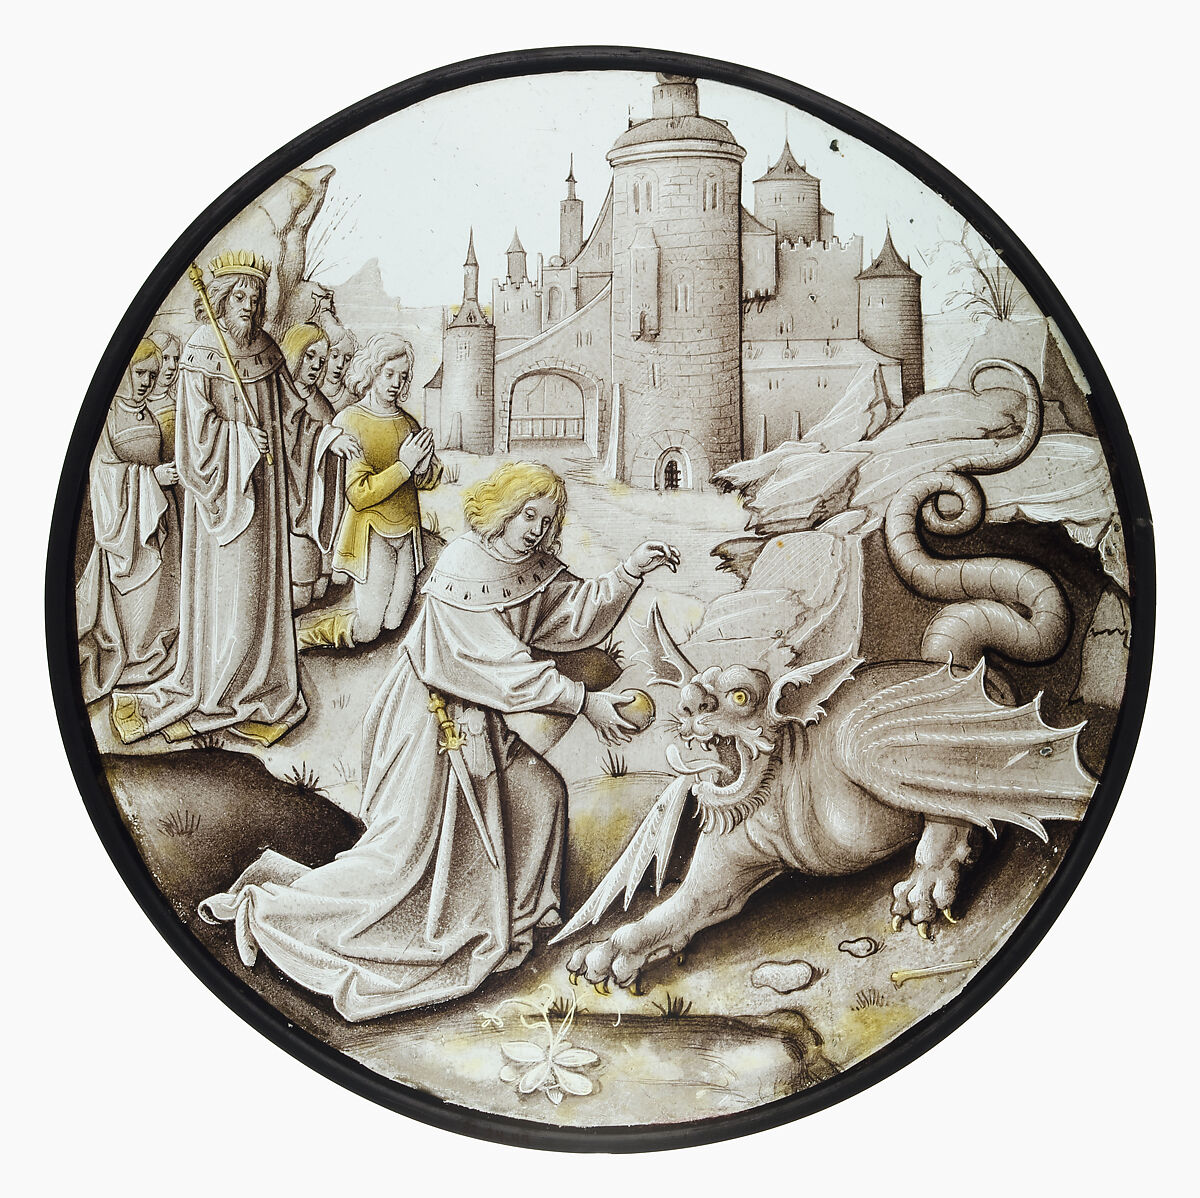 Roundel with Daniel Slaying the Dragon, Style of Pseudo-Ortkens (South Netherlandish, active Antwerp and Brussels, ca. 1500–30), Colorless glass, vitreous paint and silver stain, South Netherlandish 